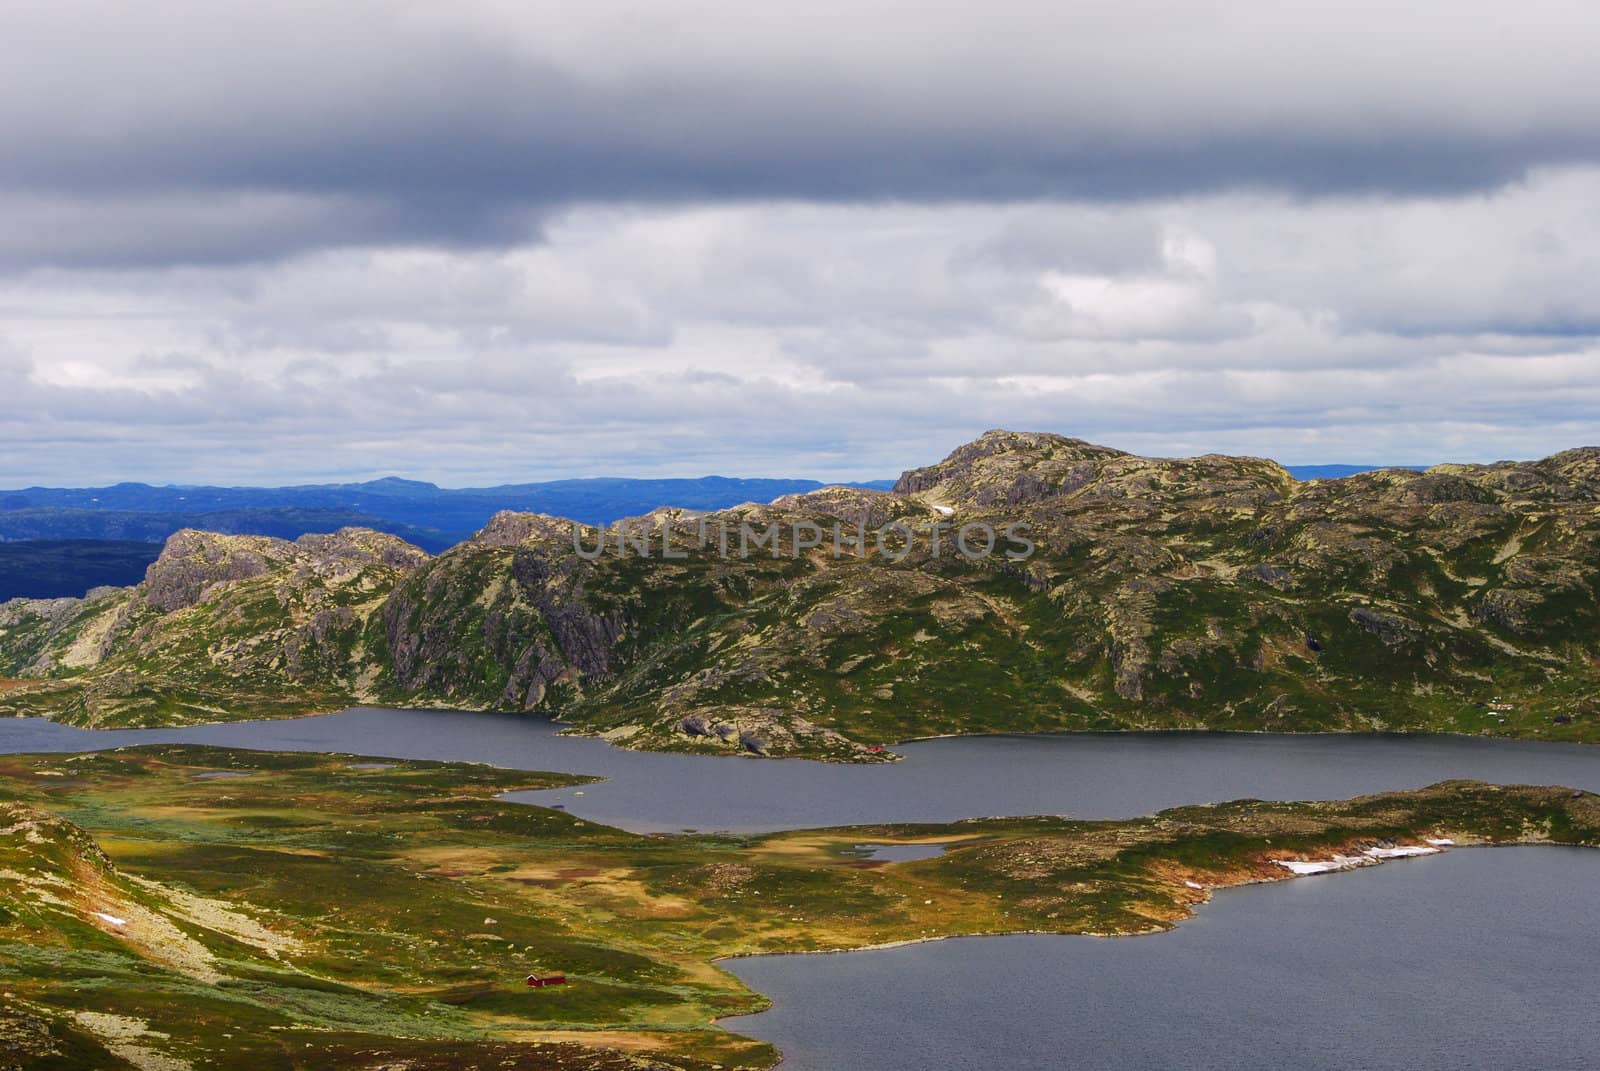 Gaustatoppen is the highest mountain in the county Telemark in Norway. The view from the summit is impressive, as one can see an area of approximately 60,000 km², one sixth of Norways mainland.